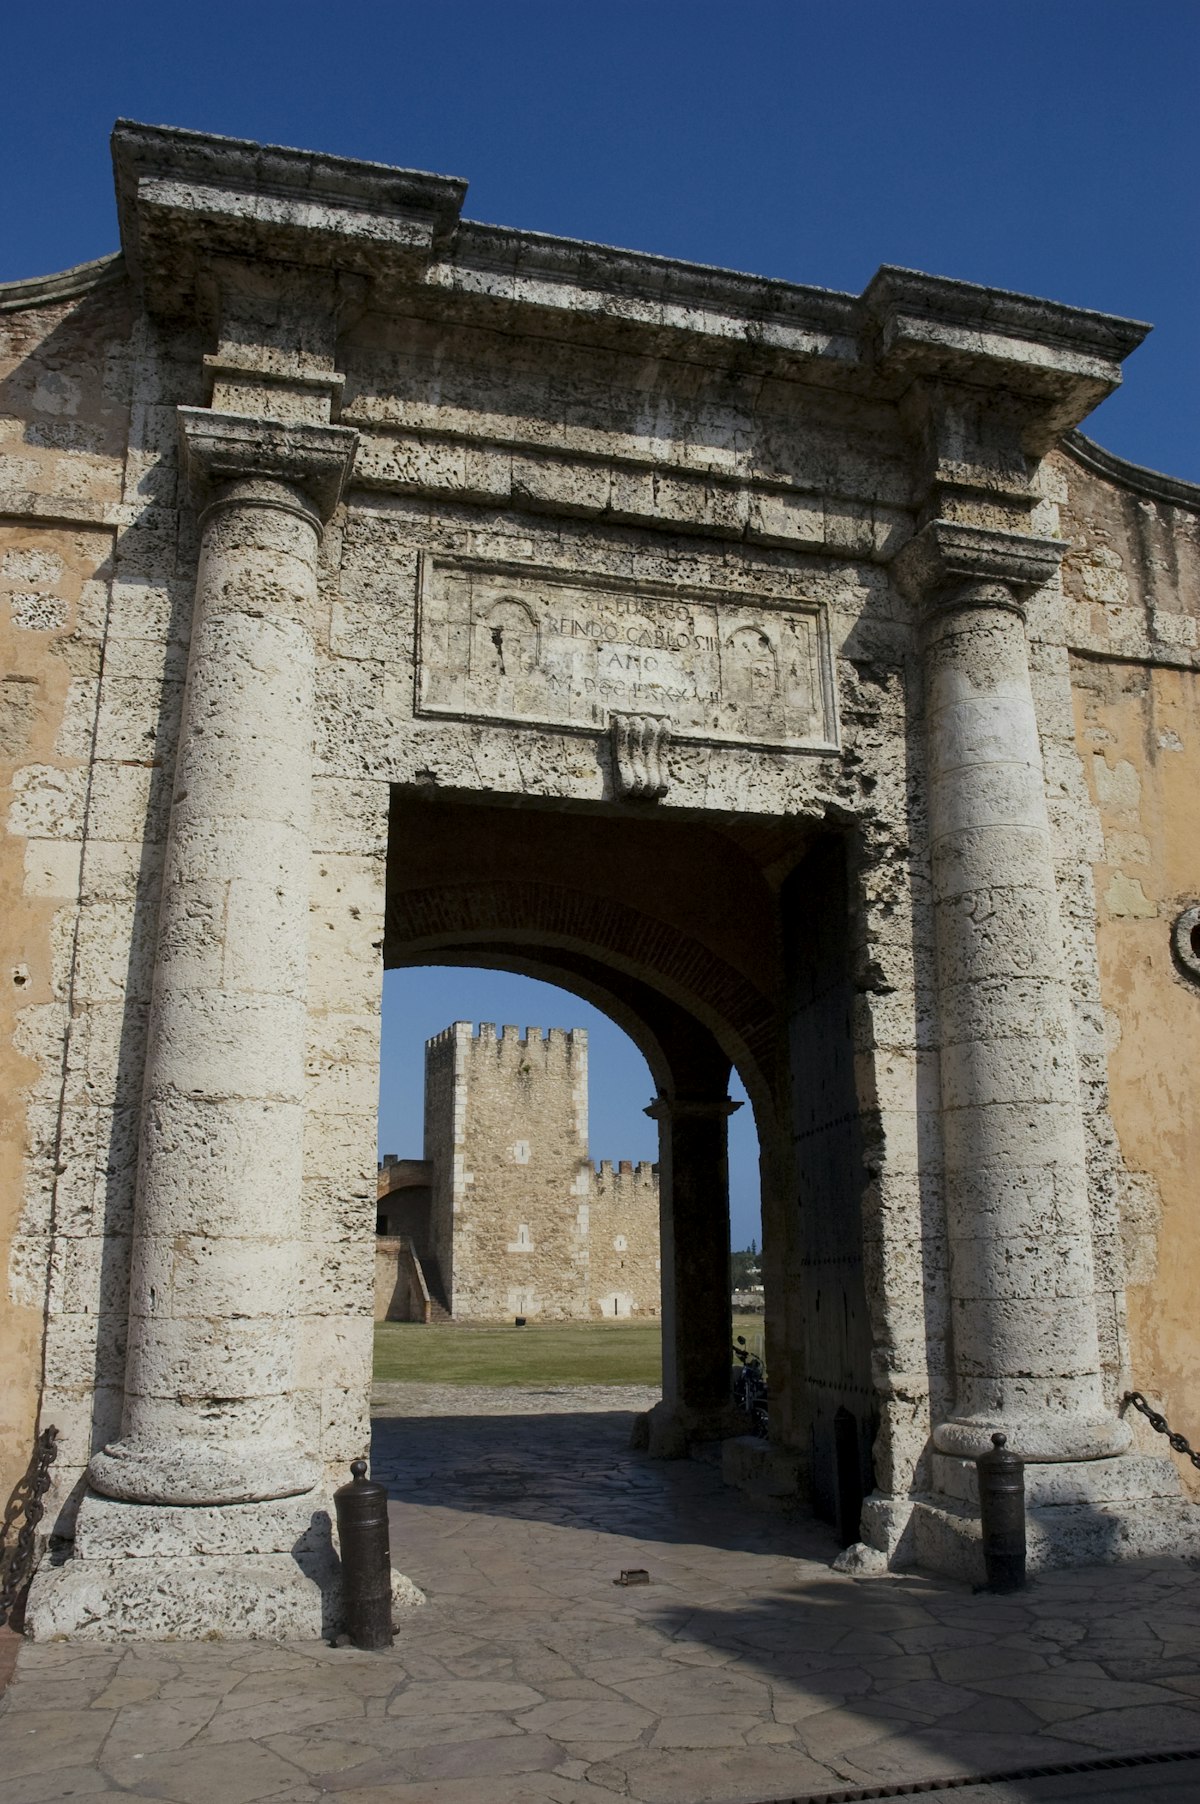 Charles III gate with Tower of Homage in background, Fortaleza Ozama.